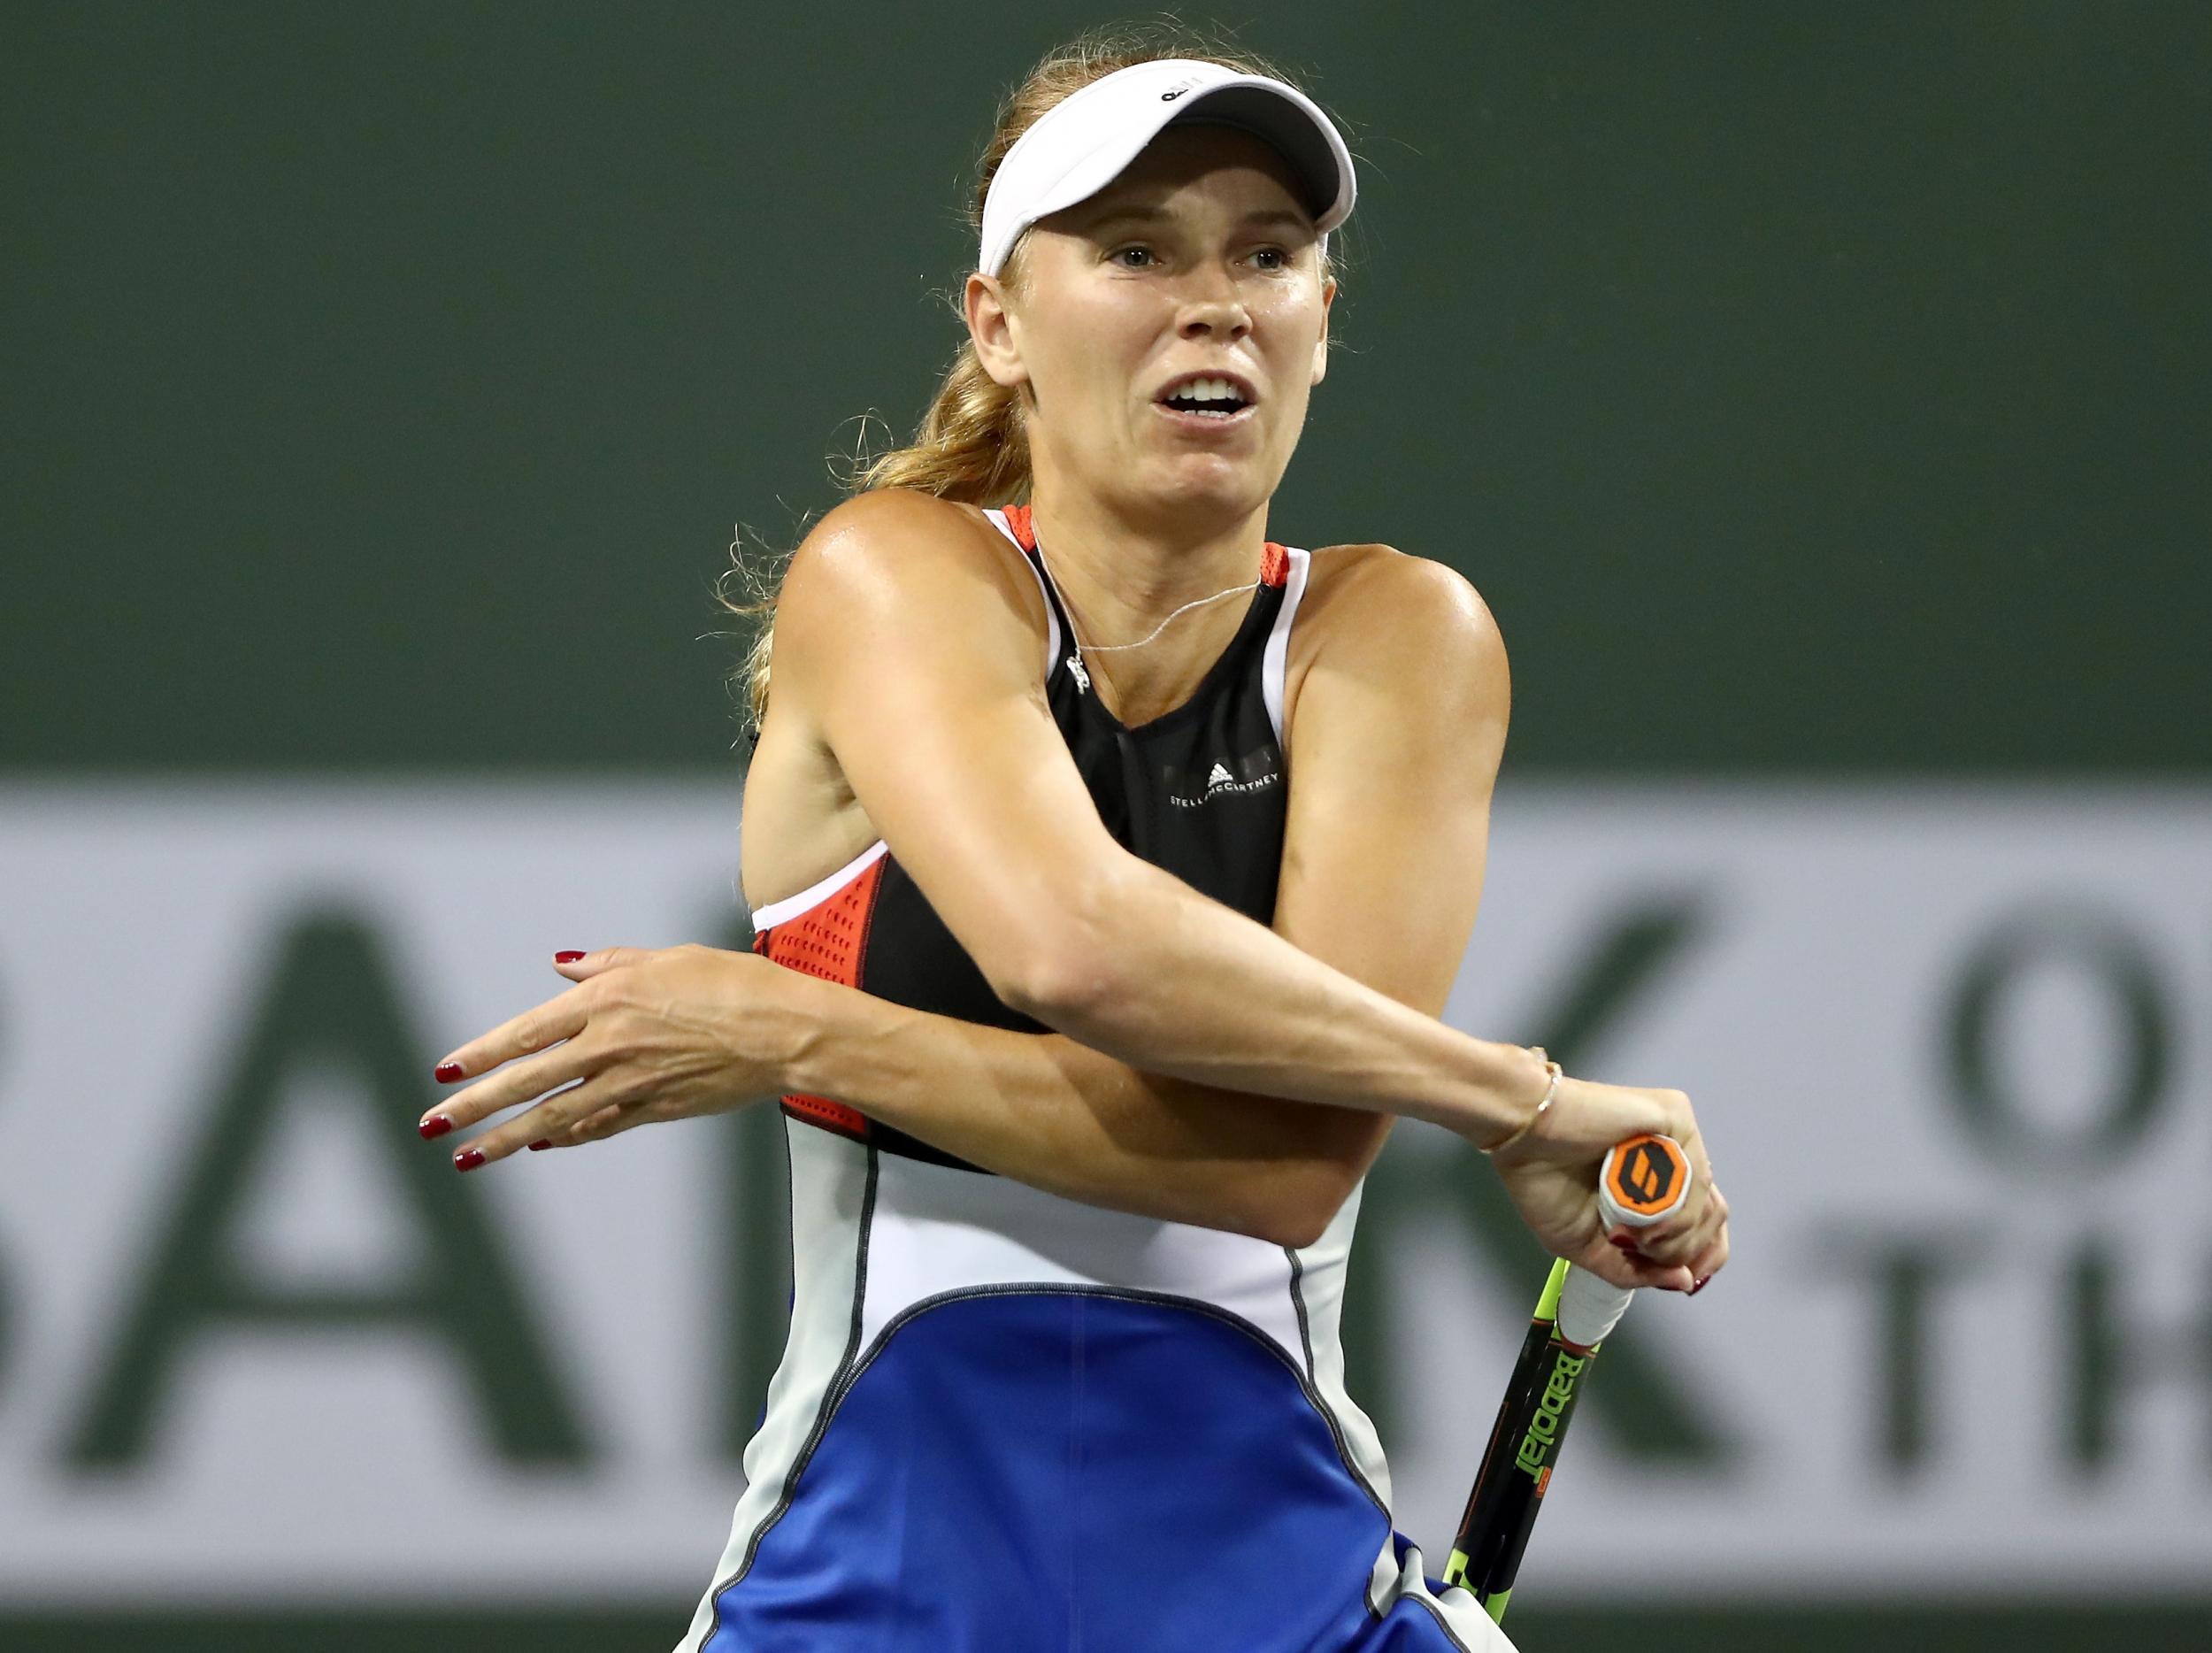 Caroline Wozniacki can now no longer become world number one this week